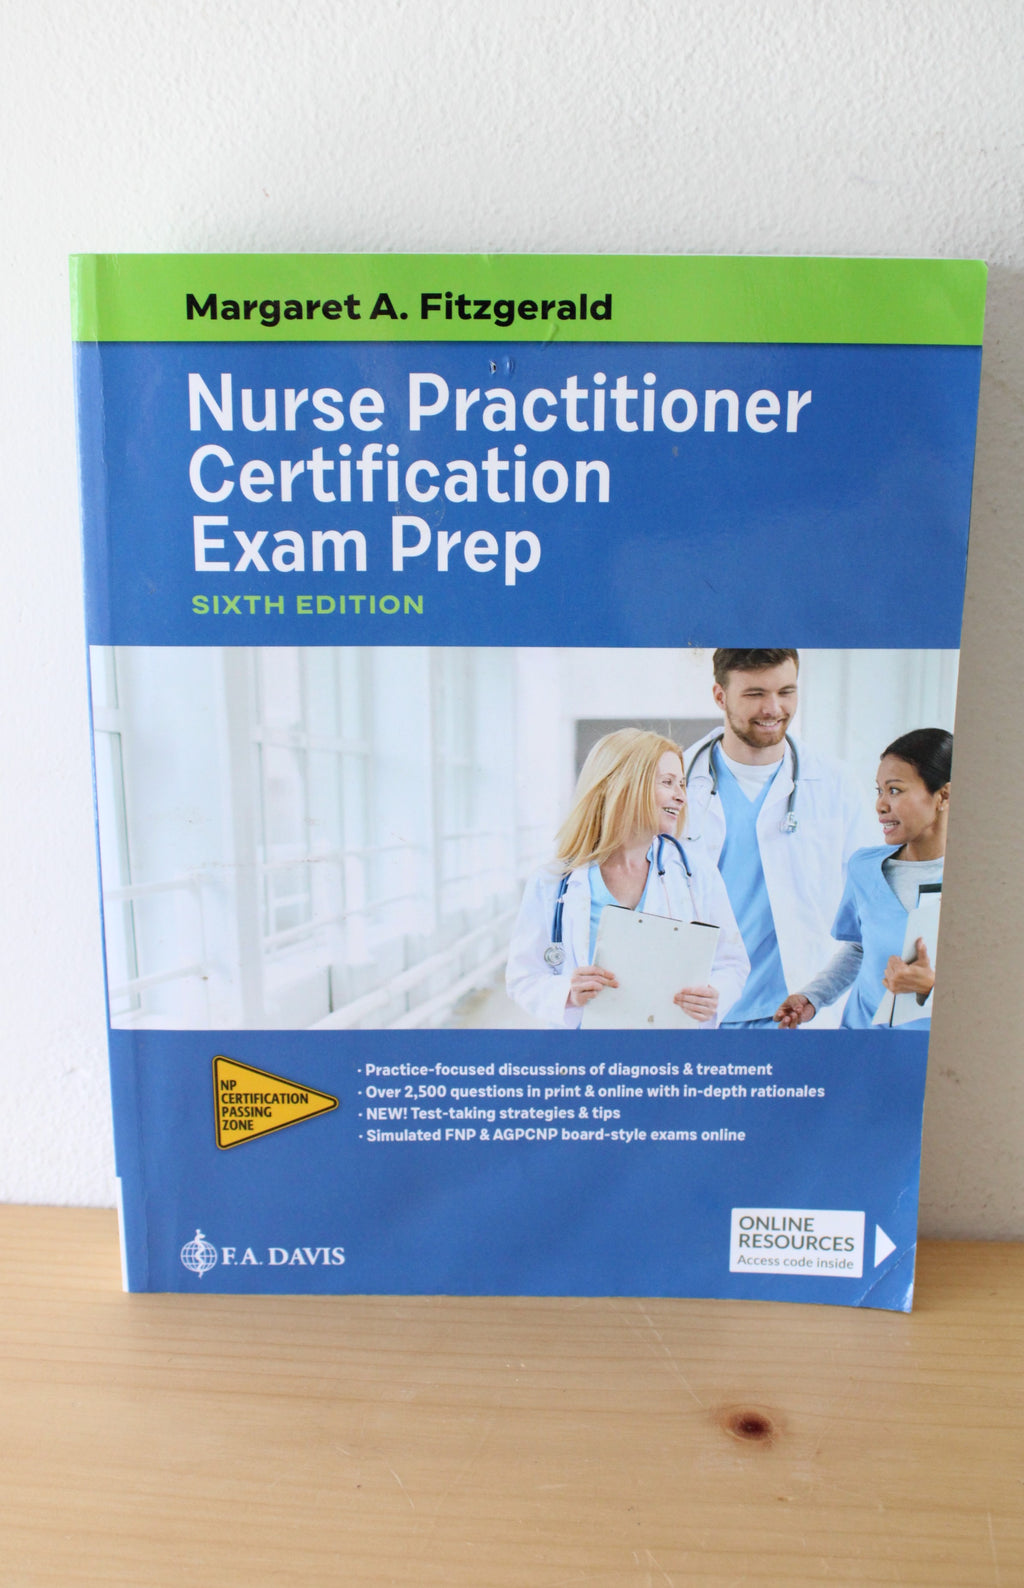 Nurse Practitioner Certification Exam Prep 6th Edition By Margaret A. Fitzgerald